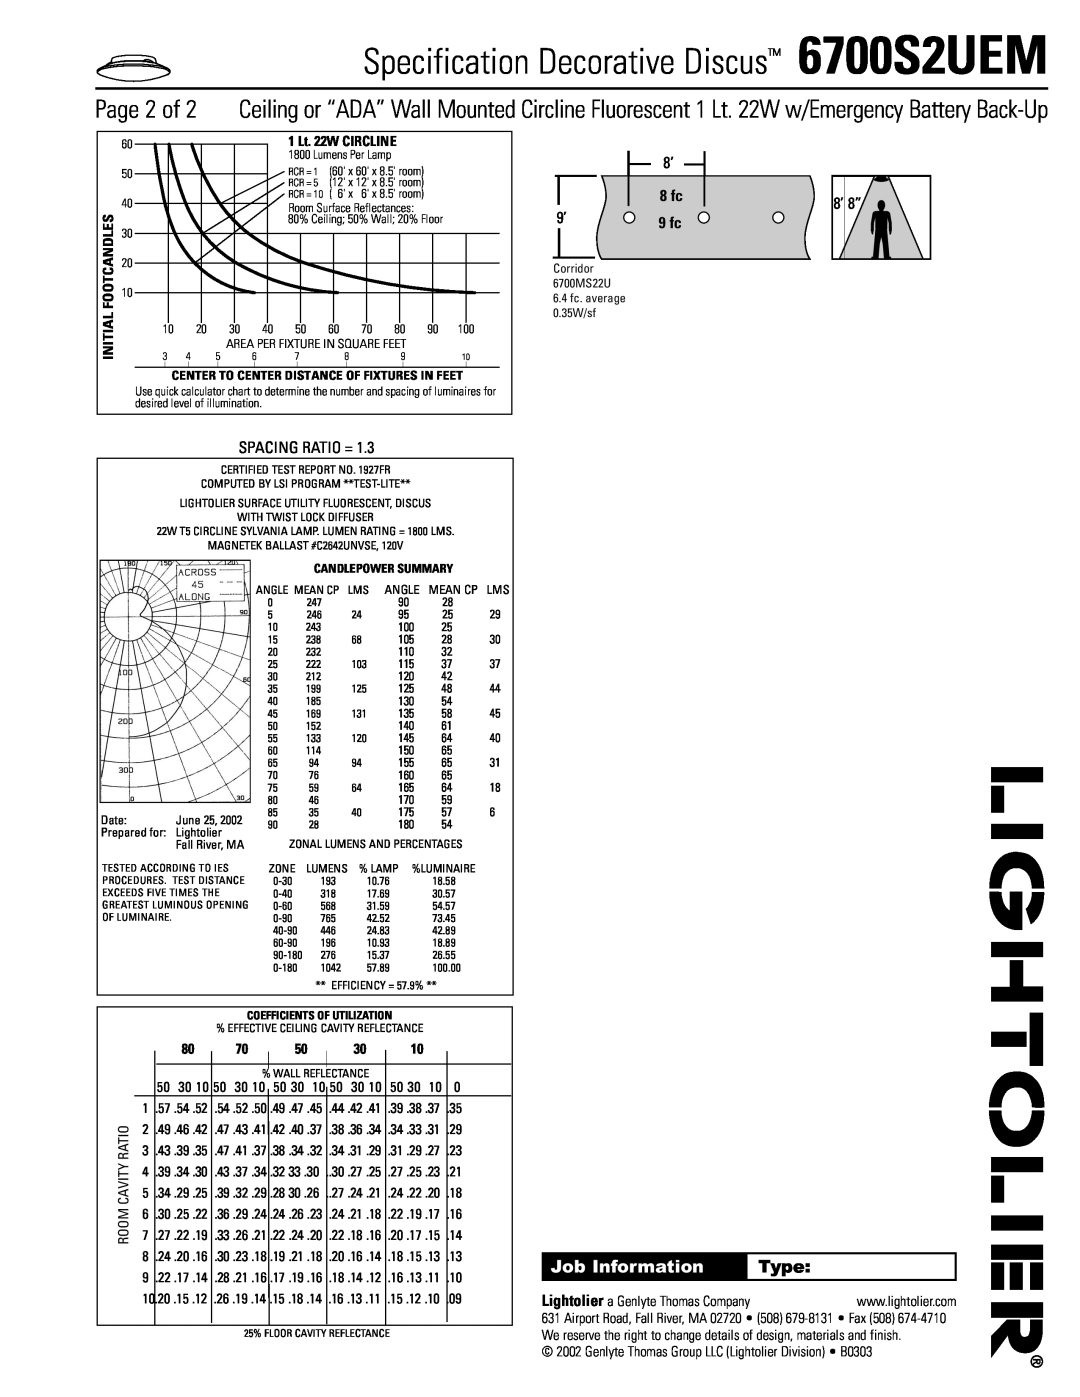 Lightolier Specification Decorative Discus 6700S2UEM, Job Information, Type, Initial Footcandles, 8 fc, Spacing Ratio = 